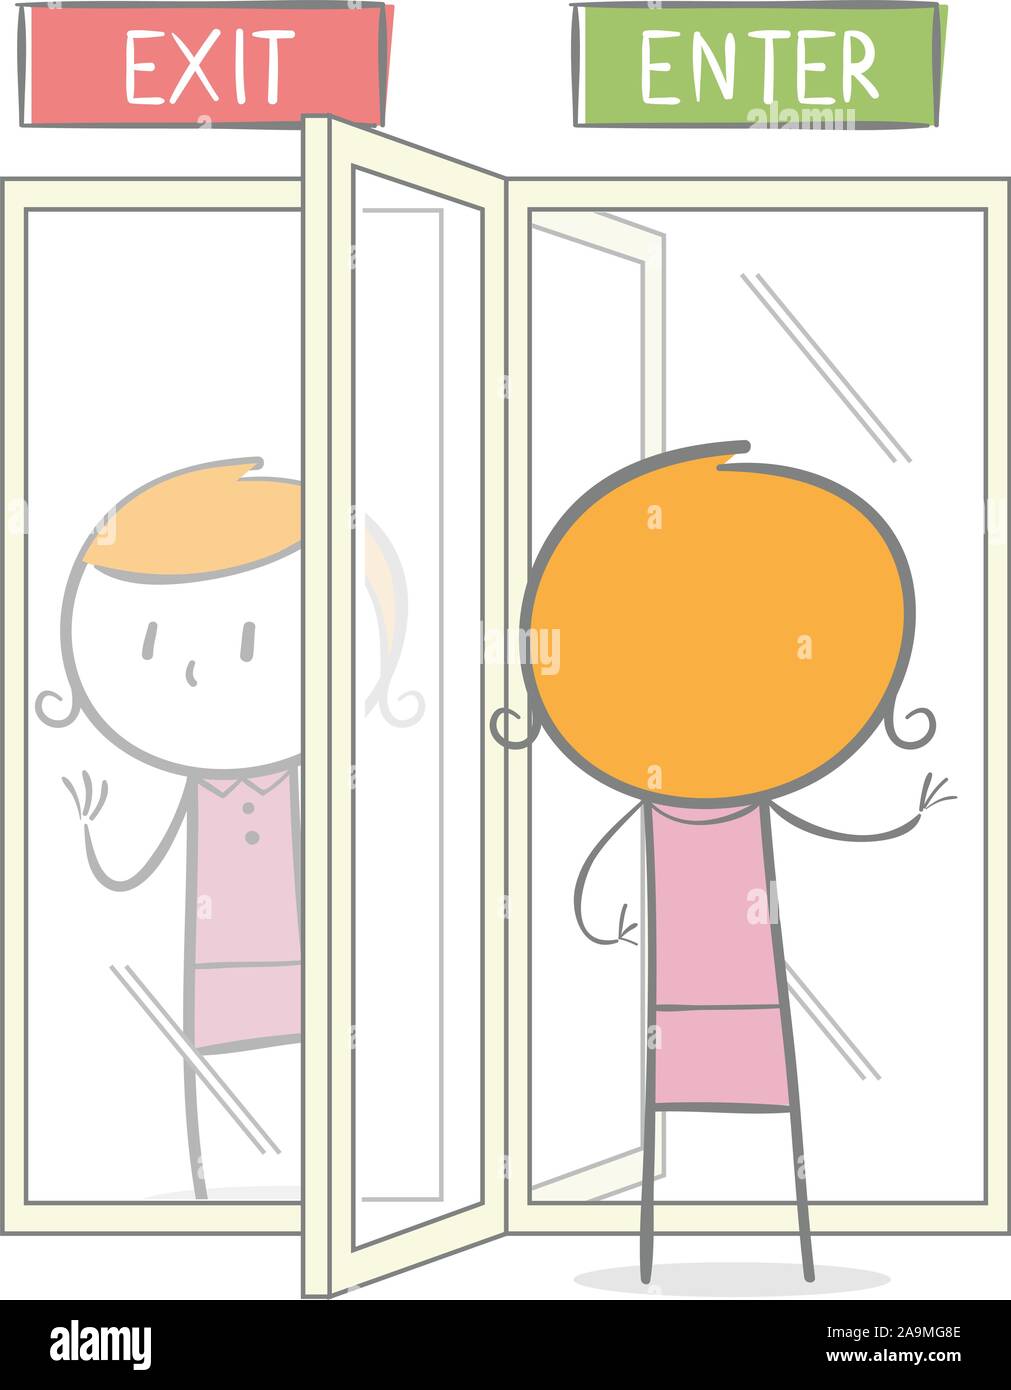 Doodle stick figure: A woman entering a revolving door while on the other side whe want to getting out. Stock Vector